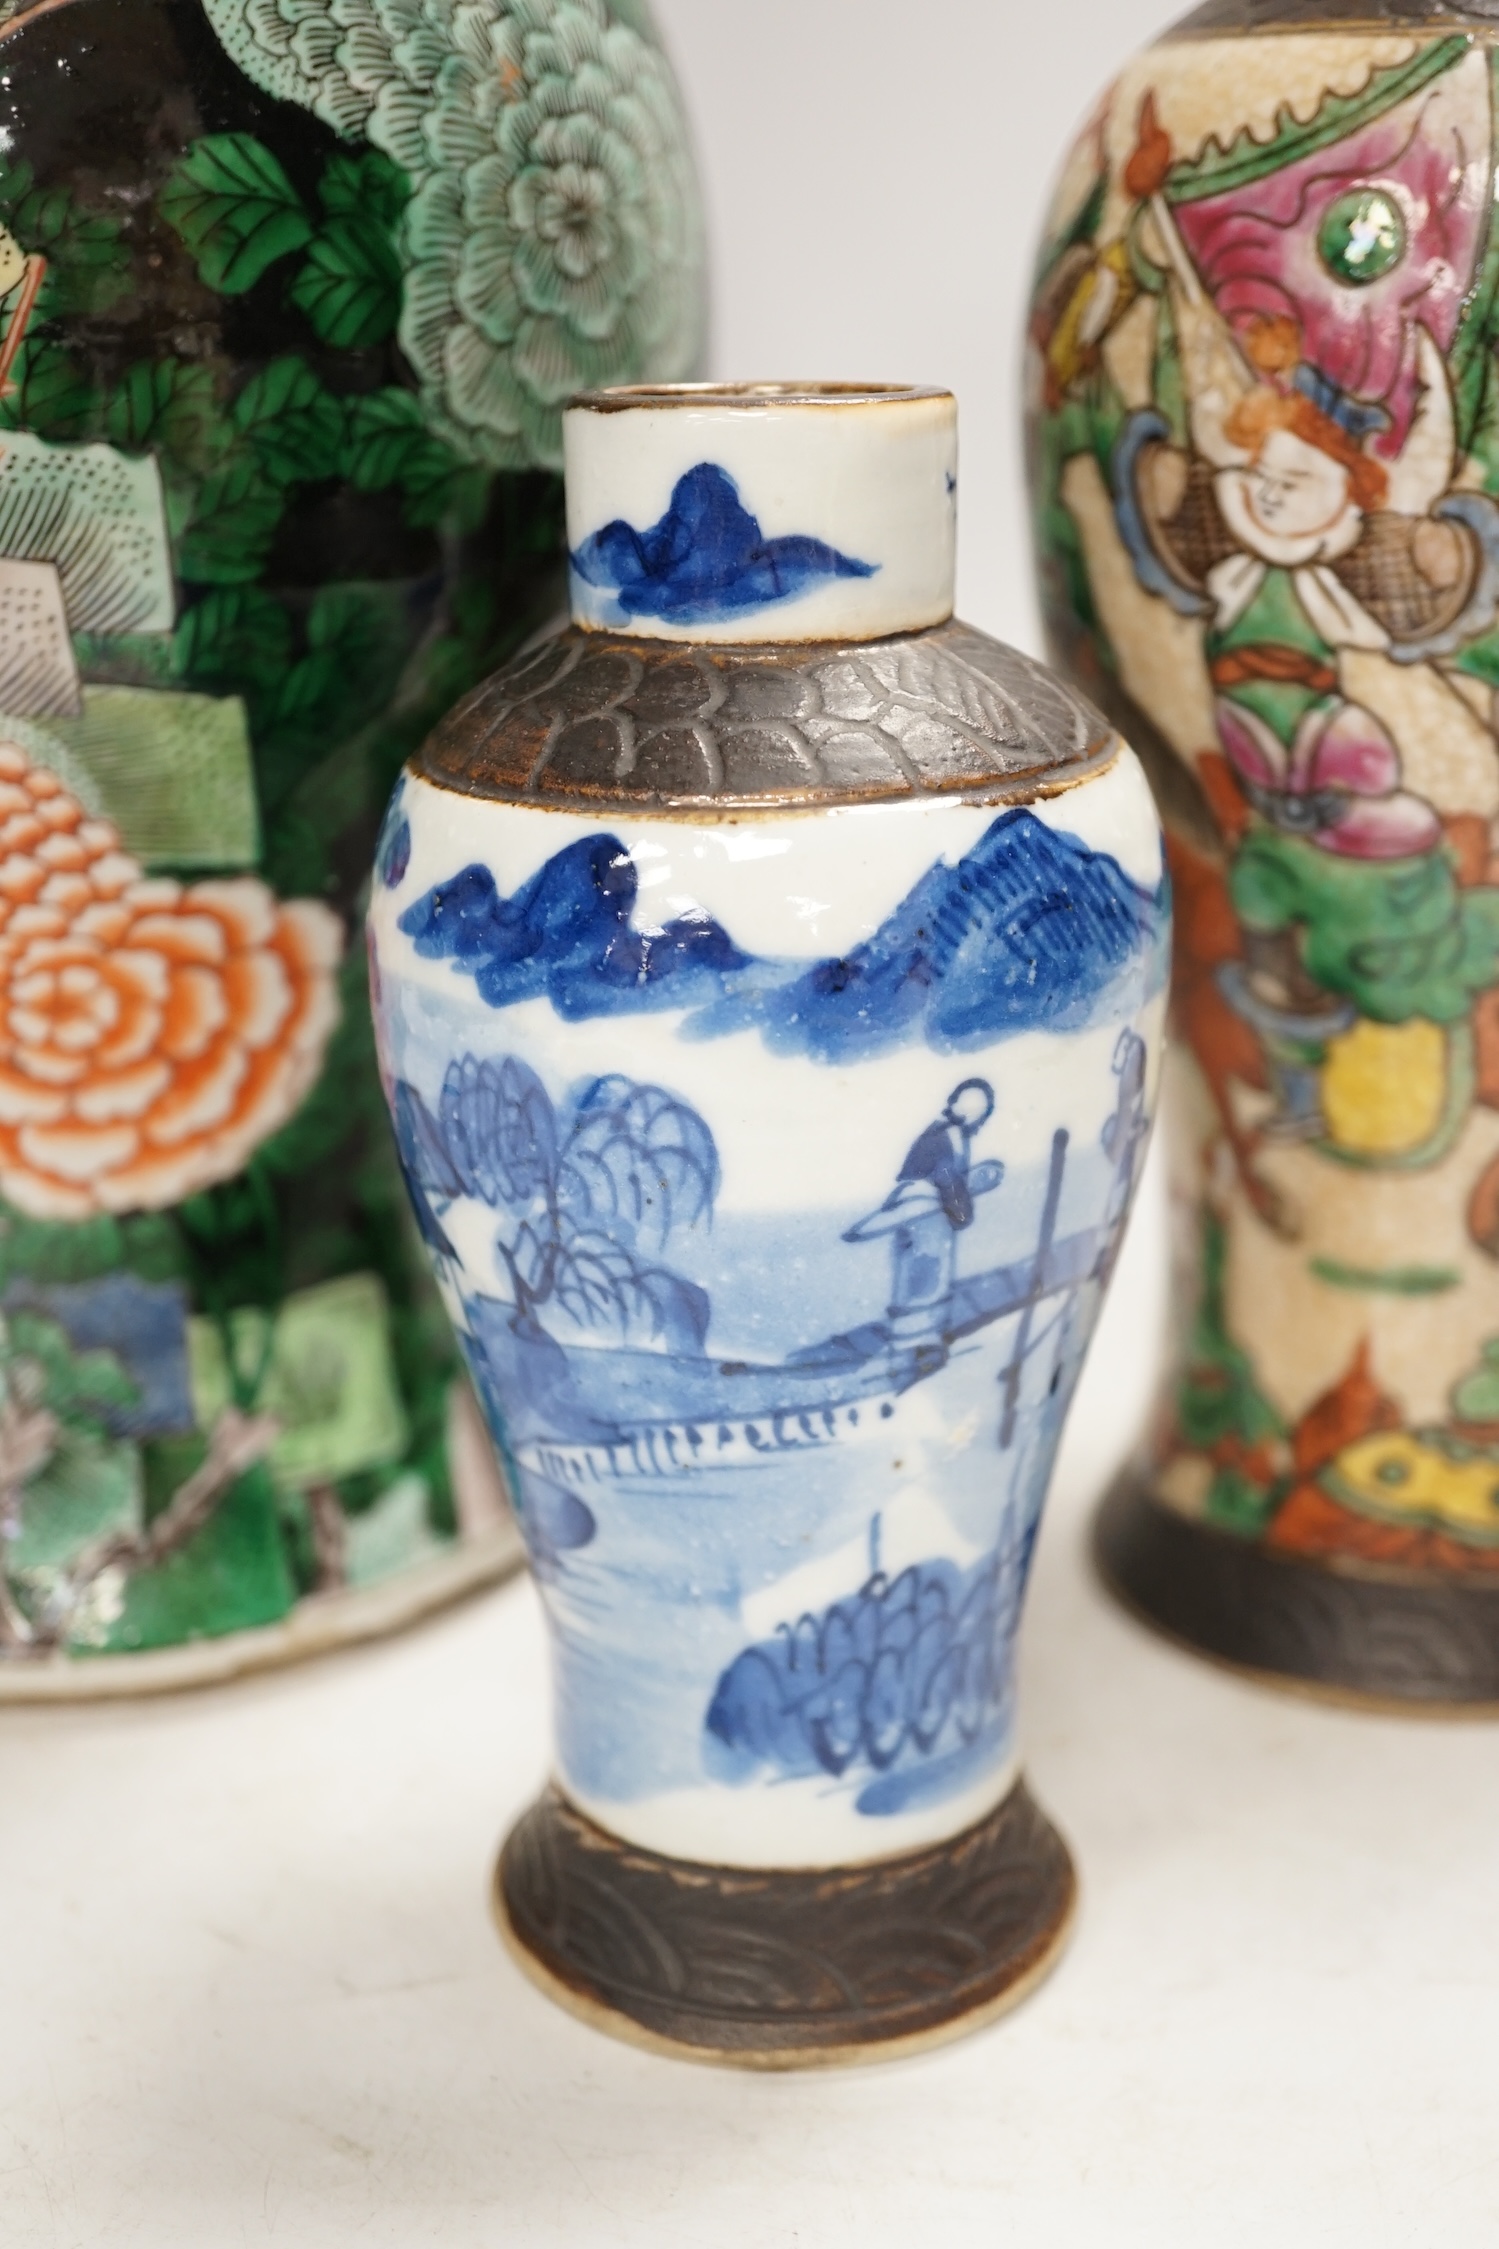 Three Chinese vases, 19th/early 20th century, including a cut down famille noire vase, crackleglaze and blue and white vases, tallest 34cm. Condition - fair to poor